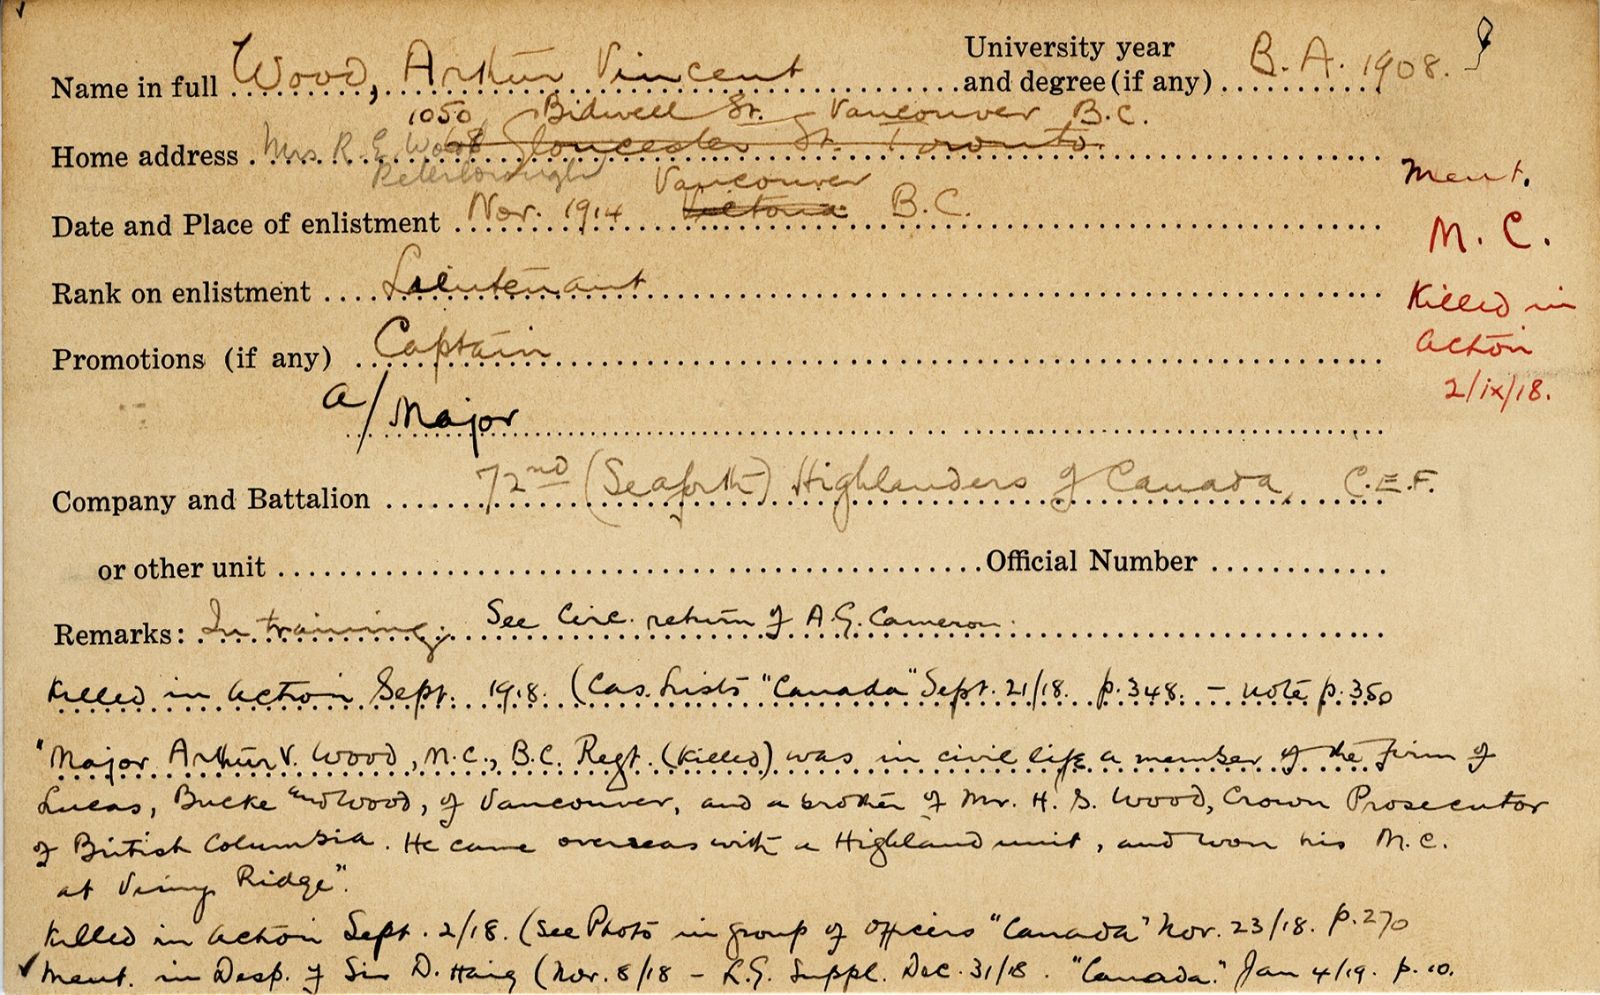 University Military Service Record of Wood, Front Page